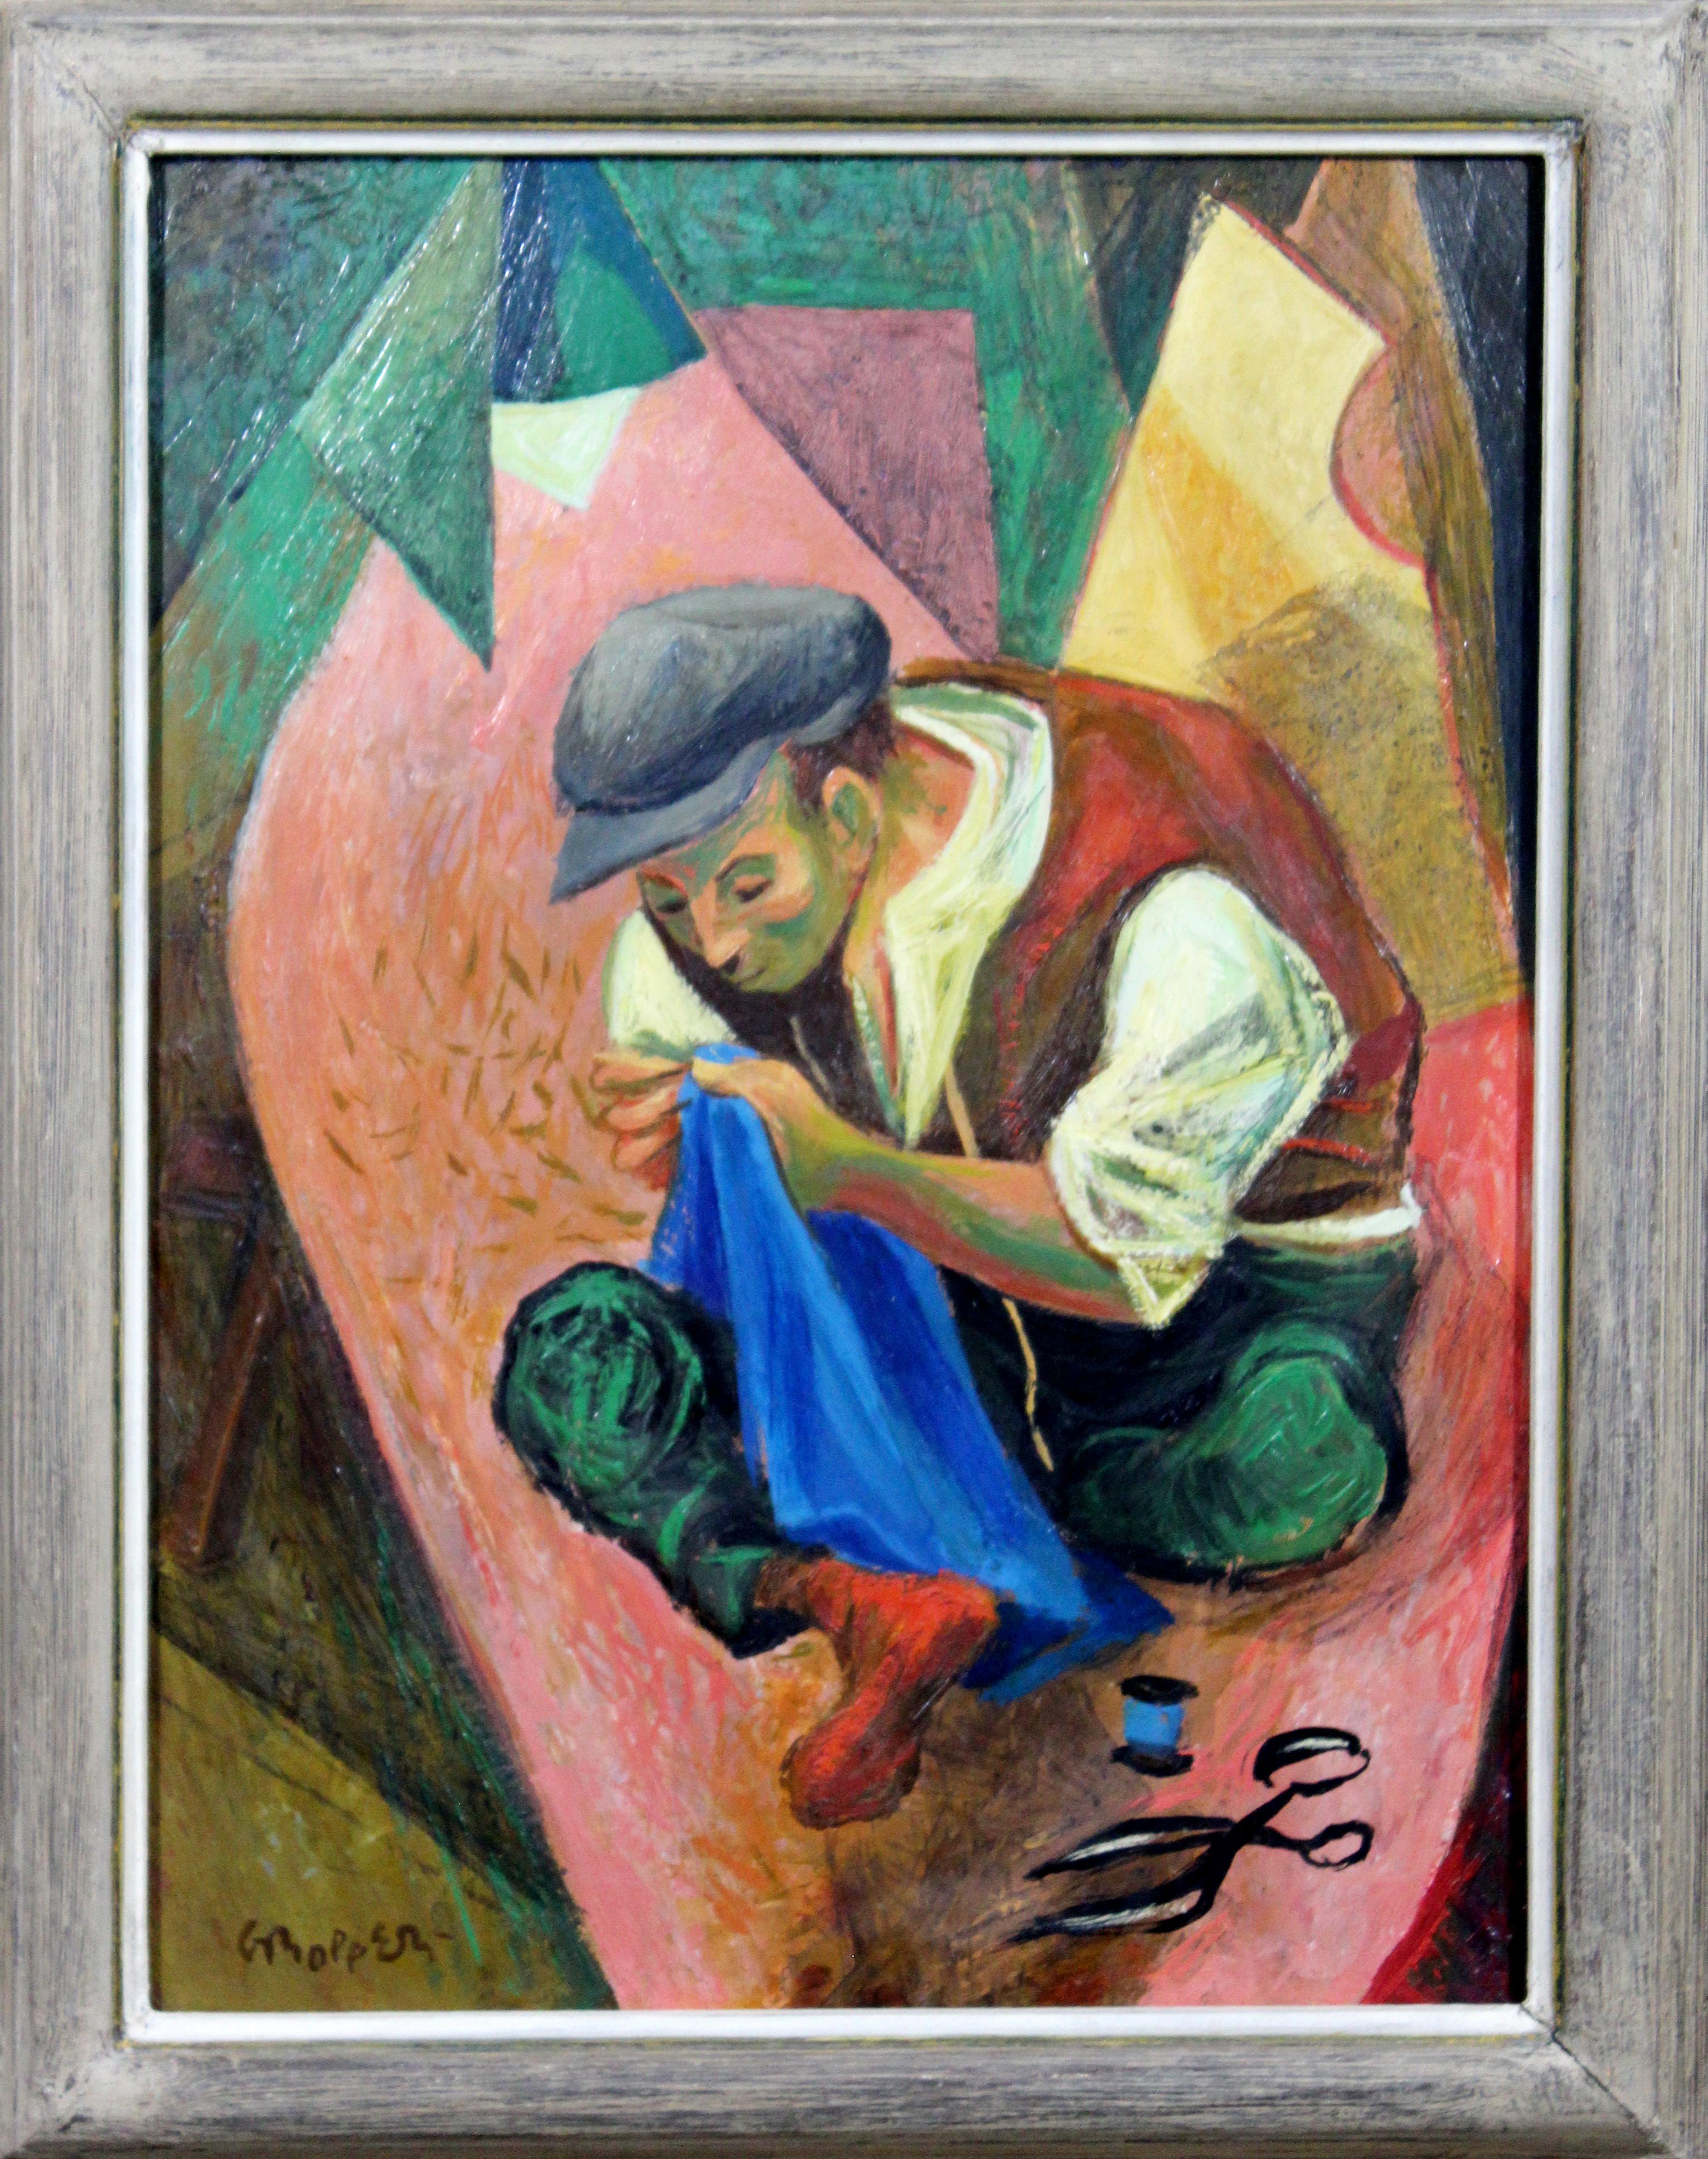 For your consideration is a vibrant, framed oil on board painting, of a man sewing, signed by William Gropper. In excellent condition. The dimensions of the frame are 19.5